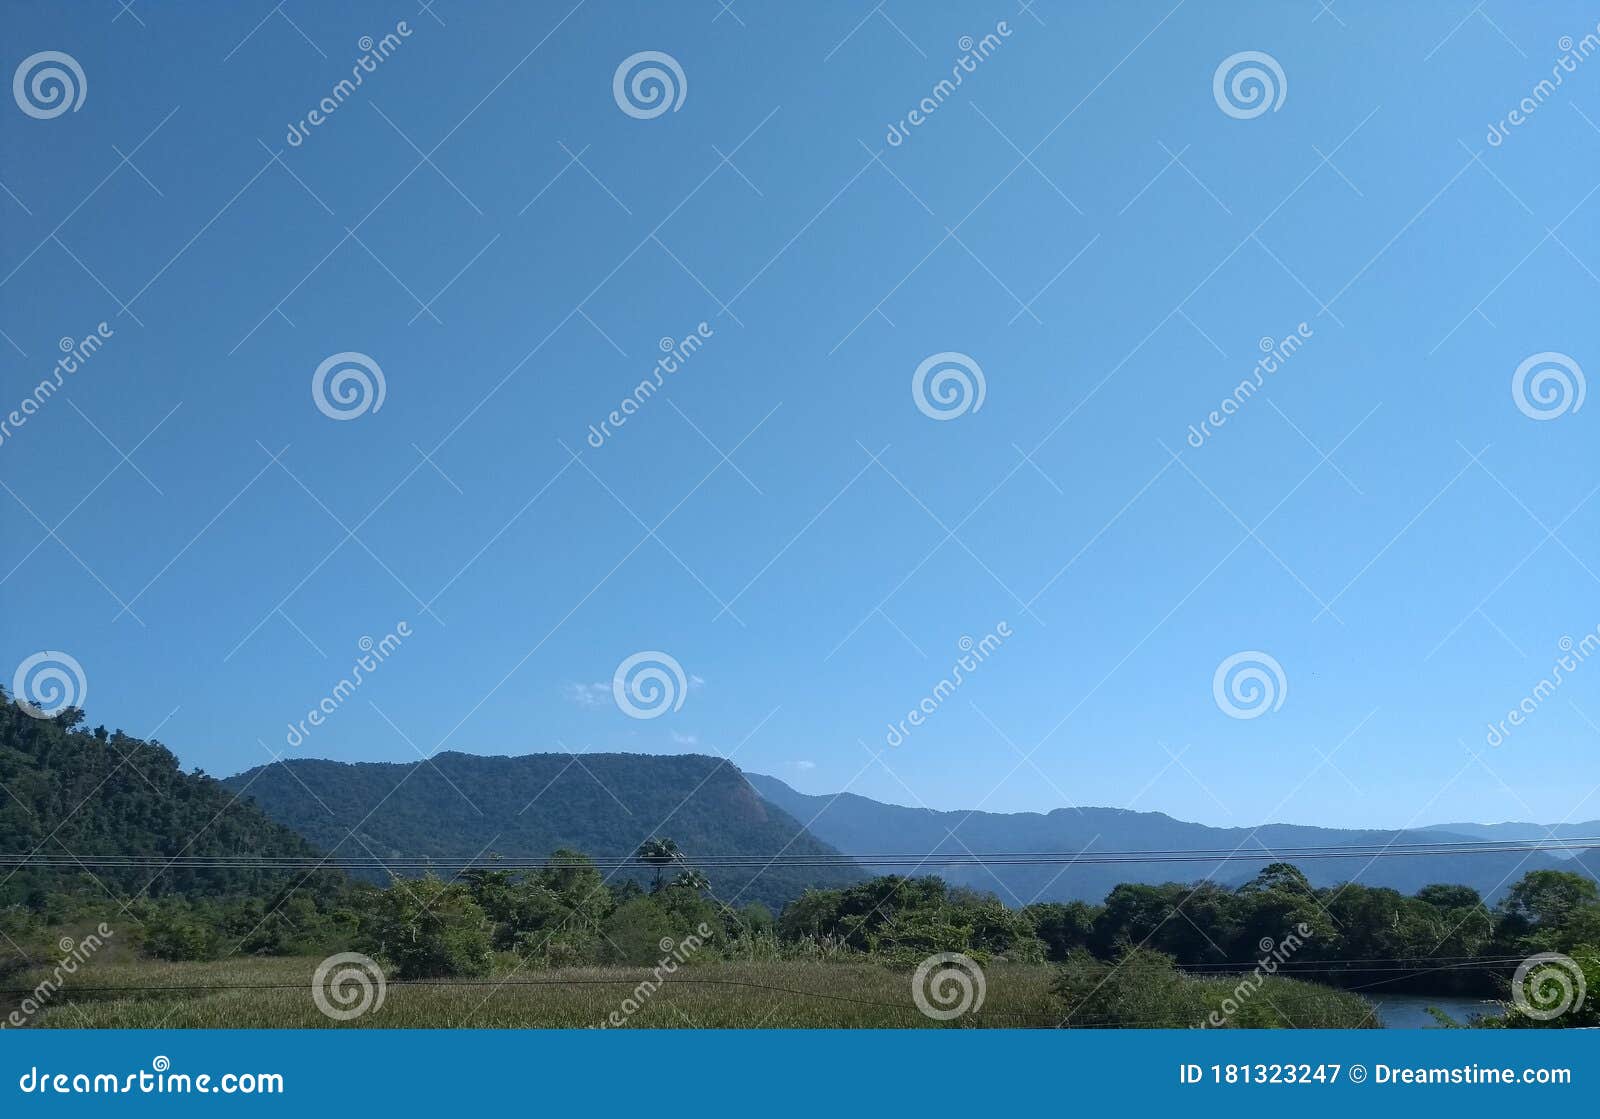 mountain with trees and the blue sky.